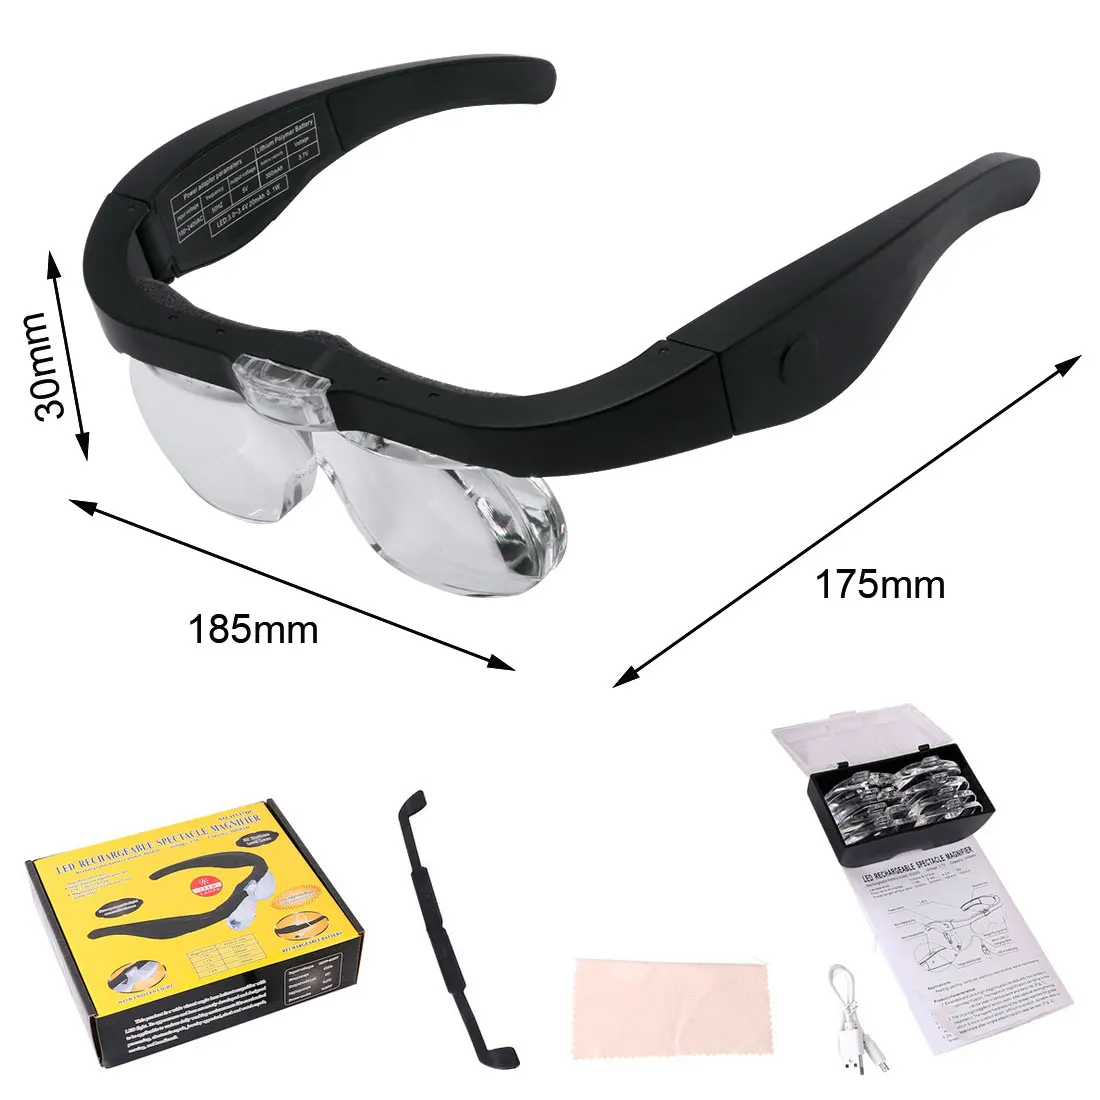 

Tattoo Beauty Surgical Helping Magnifying Glasses Magnifier 1.5X 2.5X 3.5X 5.0X USB Rechargeable With LED Light For Watch Repair